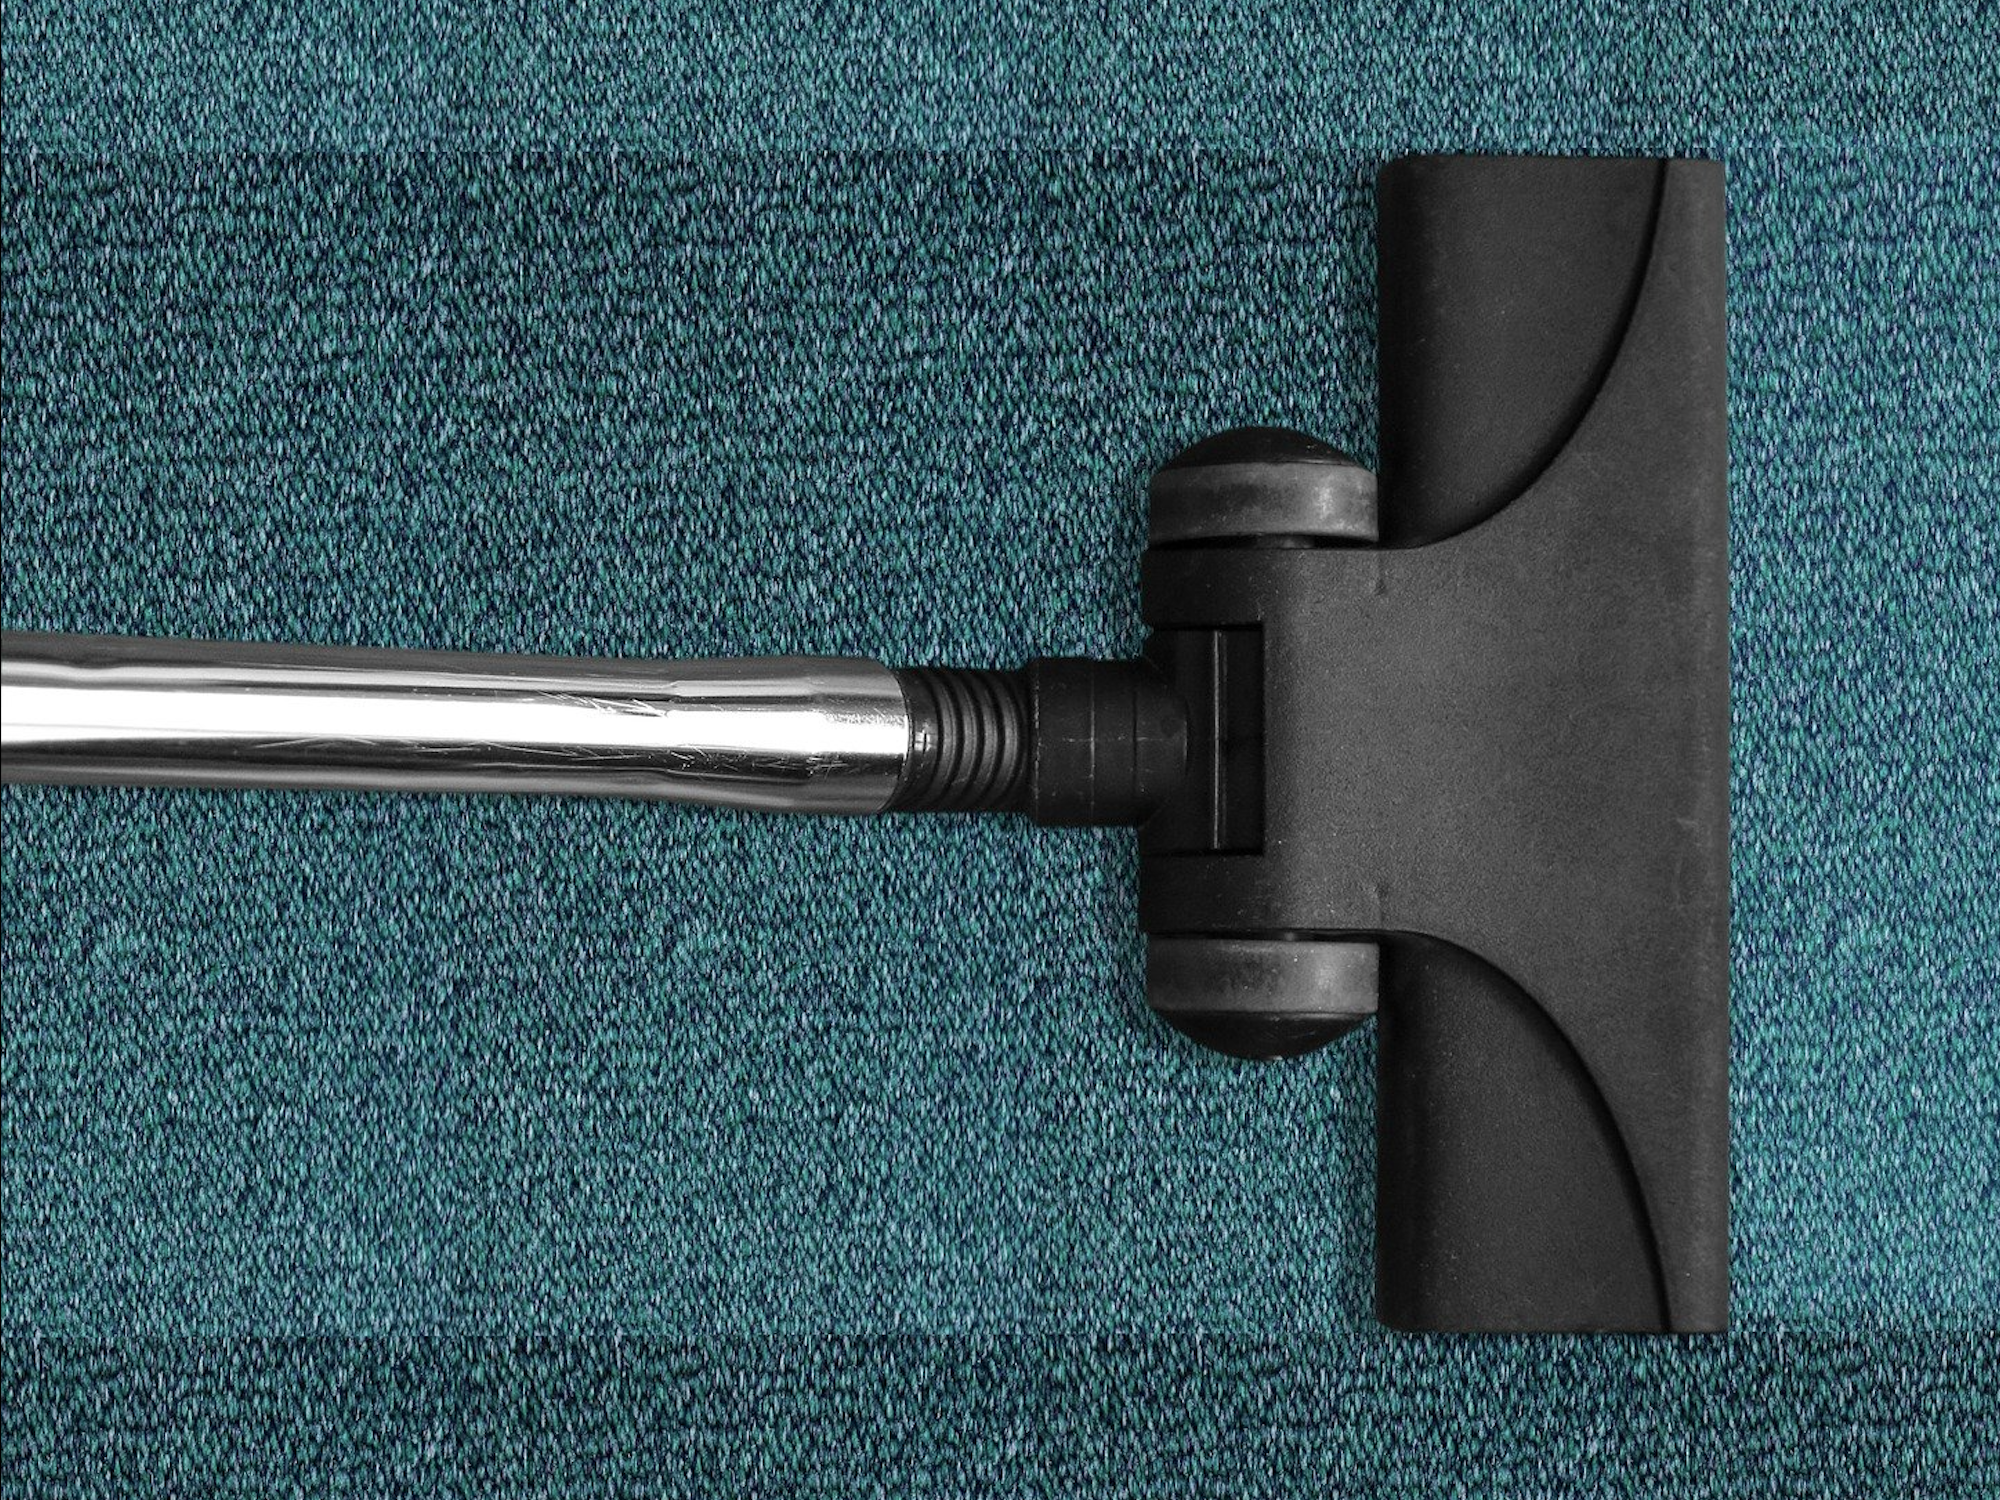 A black vacuum cleaner set against blue carpet, with its path a slightly darker, cleaner color than the rest of the floor.